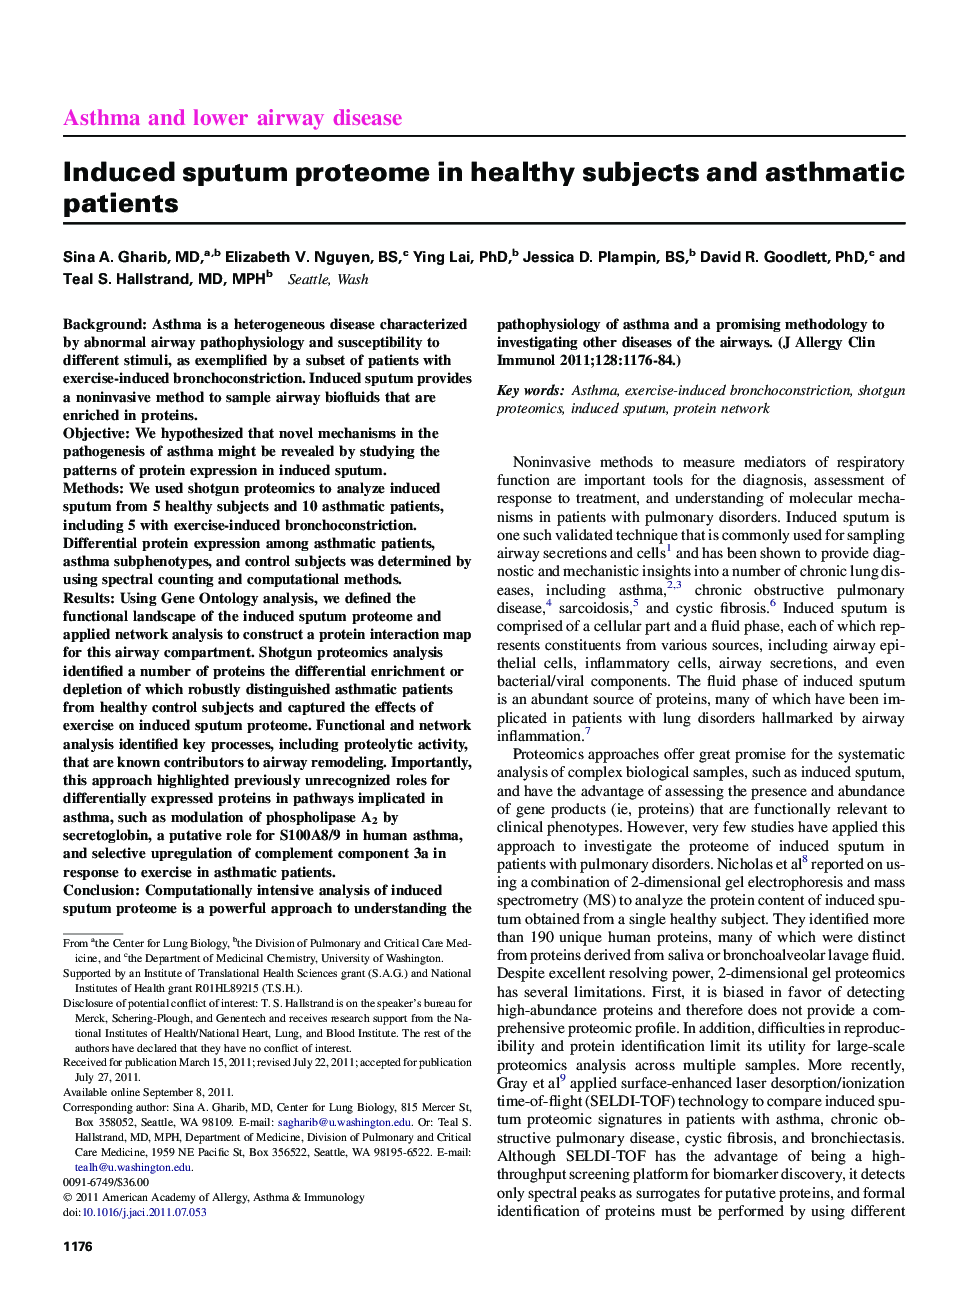 Asthma and lower airway diseaseInduced sputum proteome in healthy subjects and asthmatic patients